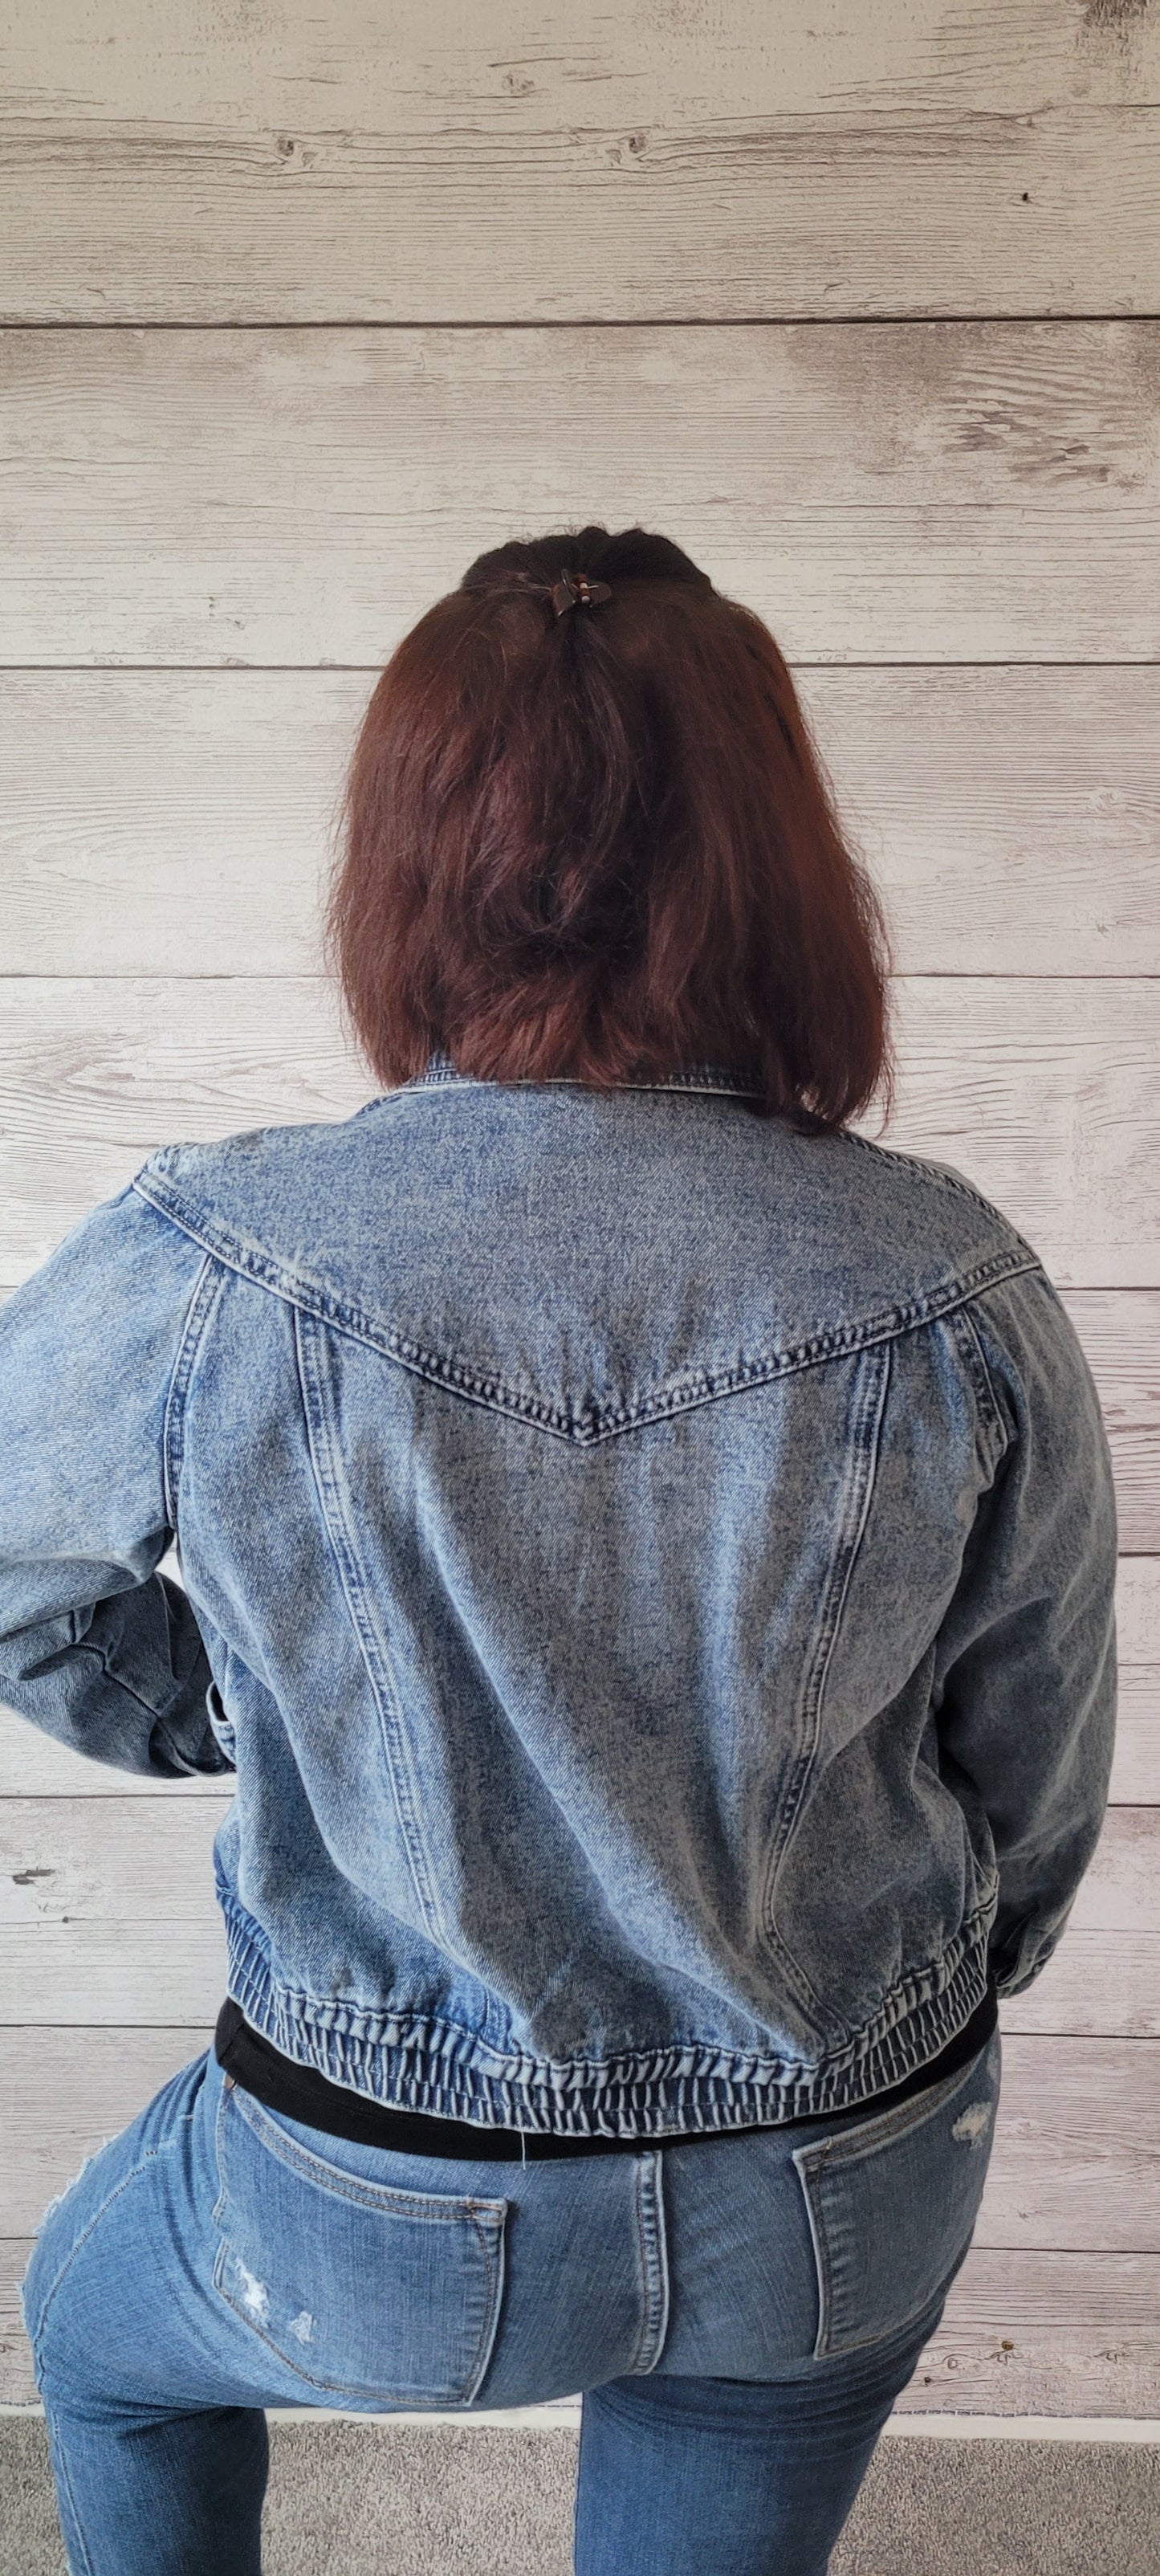 For a look that's as chill as you are, reach for this denim bomber jacket! Its distressed wash makes a stylish statement, while its elastic waistband and functional snap pockets ensure maximum comfiness. Instantly elevate any outfit with this bomber's zip up, collar neckline, slightly cropped silhouette, and asymmetrical closure with snaps down front. Don't be surprised if you end up wearing this fly little number every single day! Sizes small through large.